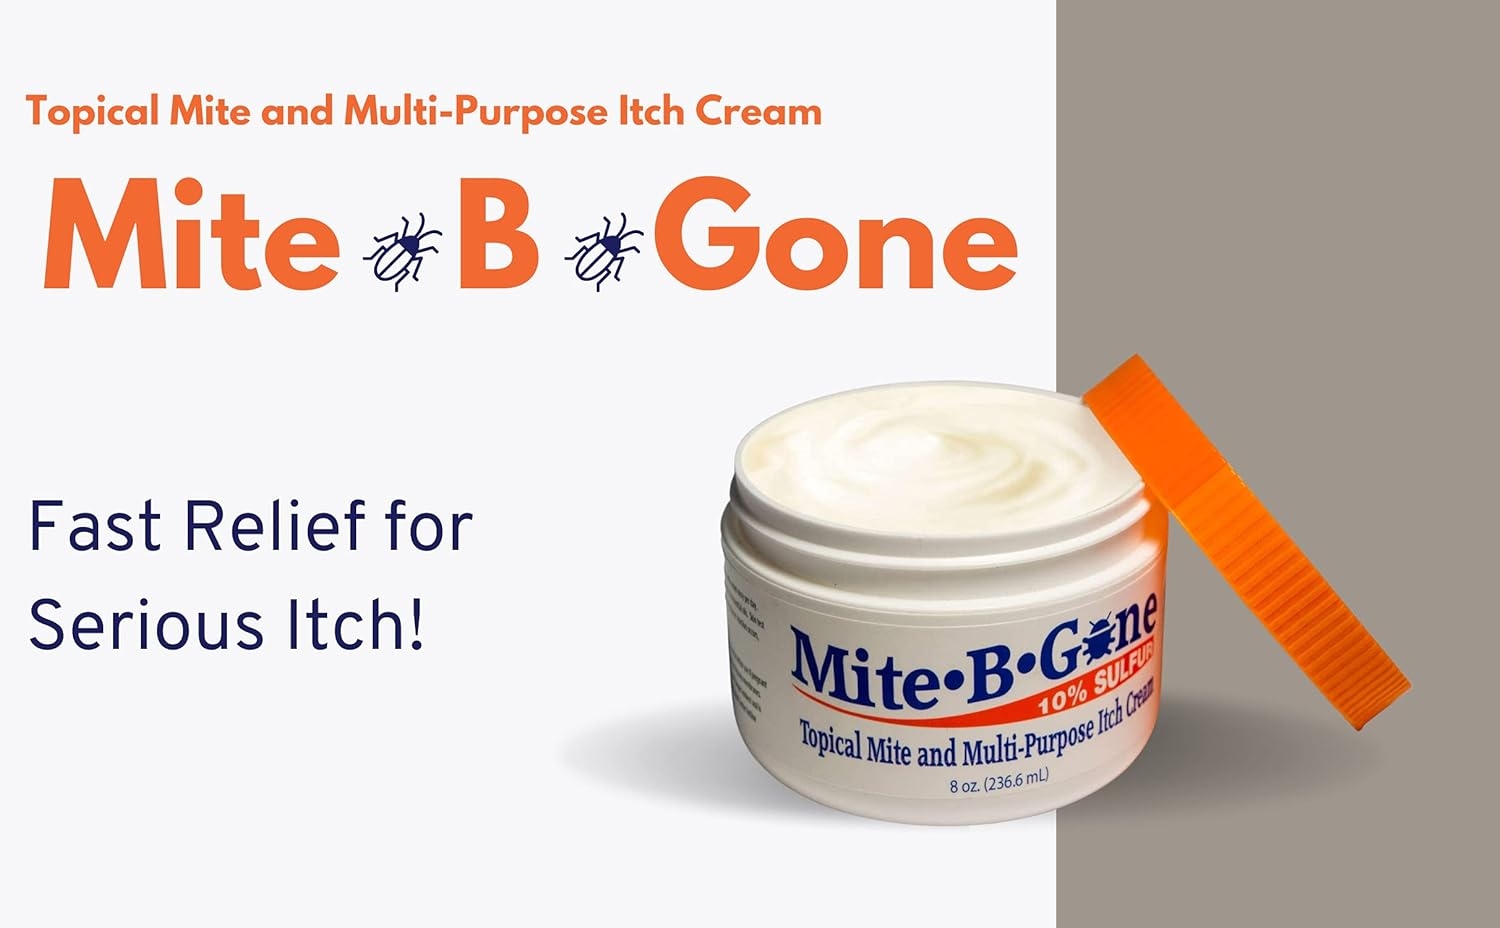 Mite-B-Gone 10% Sulfur Cream Itch Relief from Mites, Insect Bites, Acne, and Fungus (2oz) Fast and Effective Relief for All Mites with an All-Natural Blend of Anti-Inflammatory Ingredients